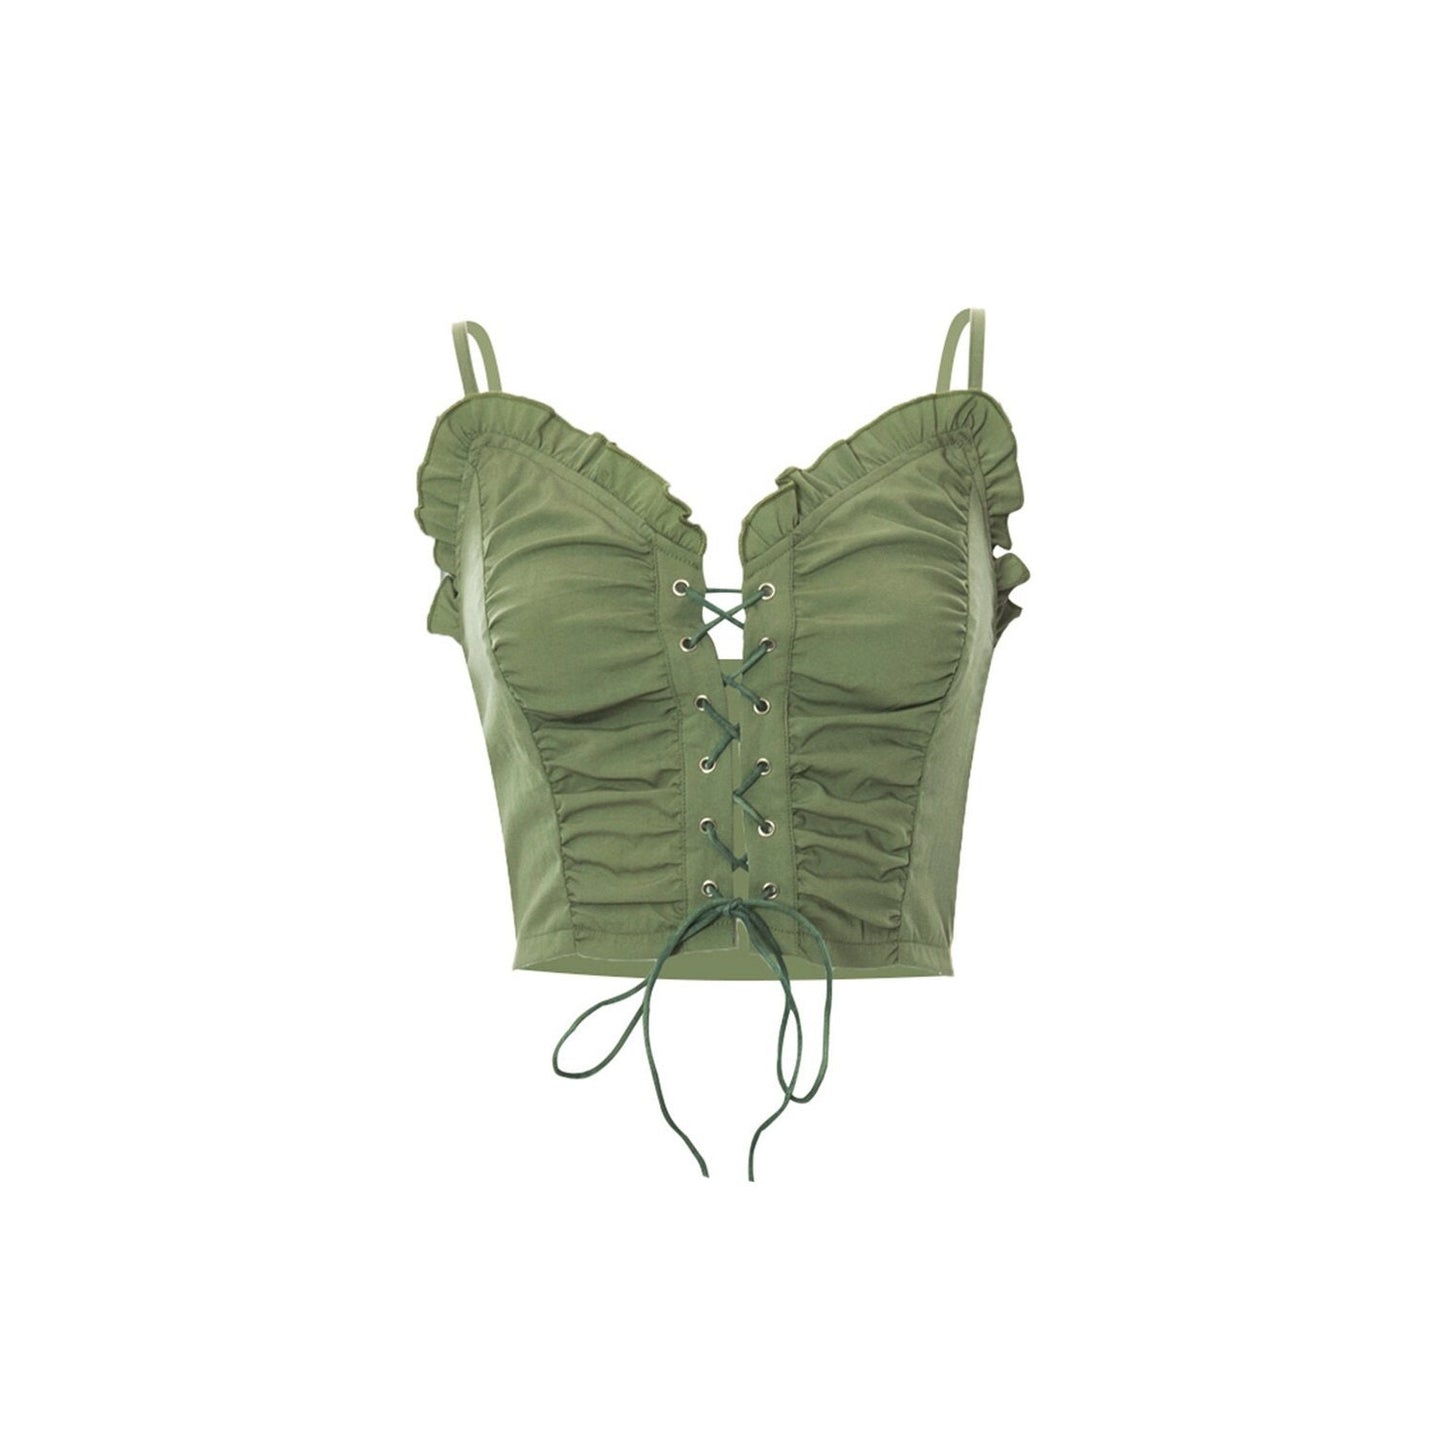 Fairycore Aesthetic Earth Green Camisole - Goblincore Aesthetic, Ruffle Trim Lace Up Casual Top - Women Boho Top